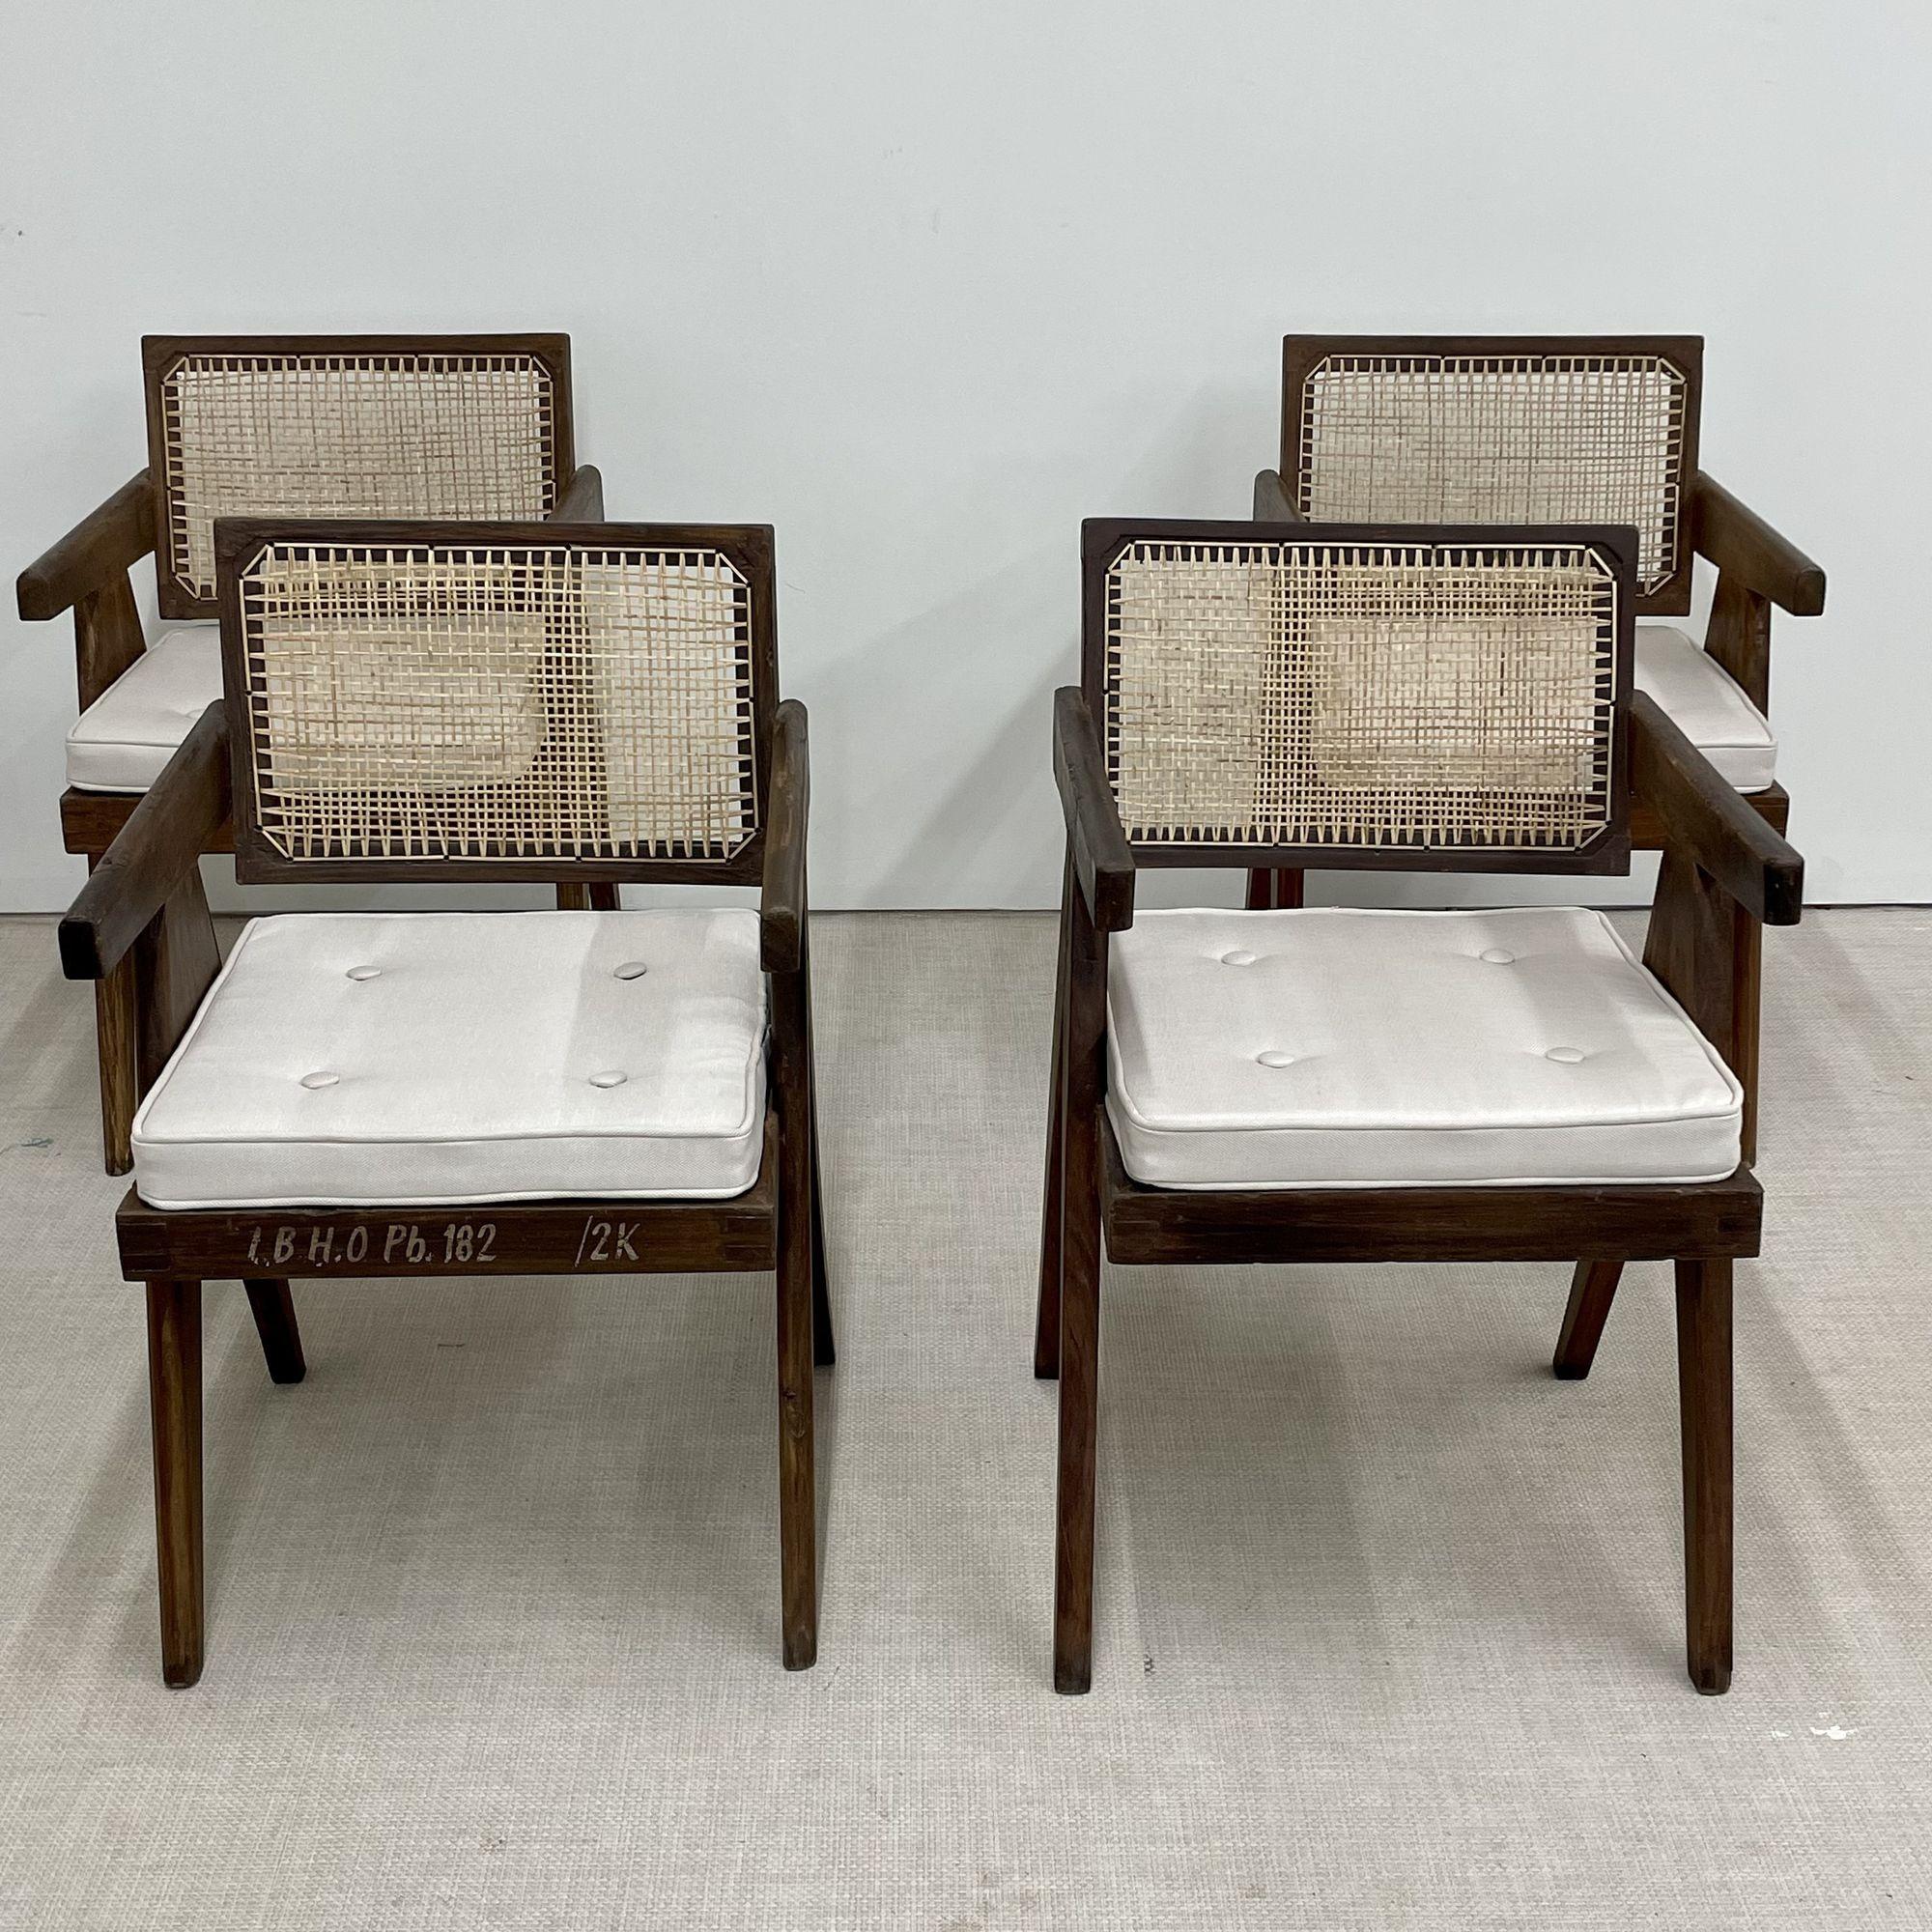 Four (4) authentic Pierre Jeanneret floating back arm chairs, Mid-Century Modern
 
Each with markings indicating provenance - These are authentic and directly from Chandigarh, India. These chairs have been lightly washed and polished. The wear to